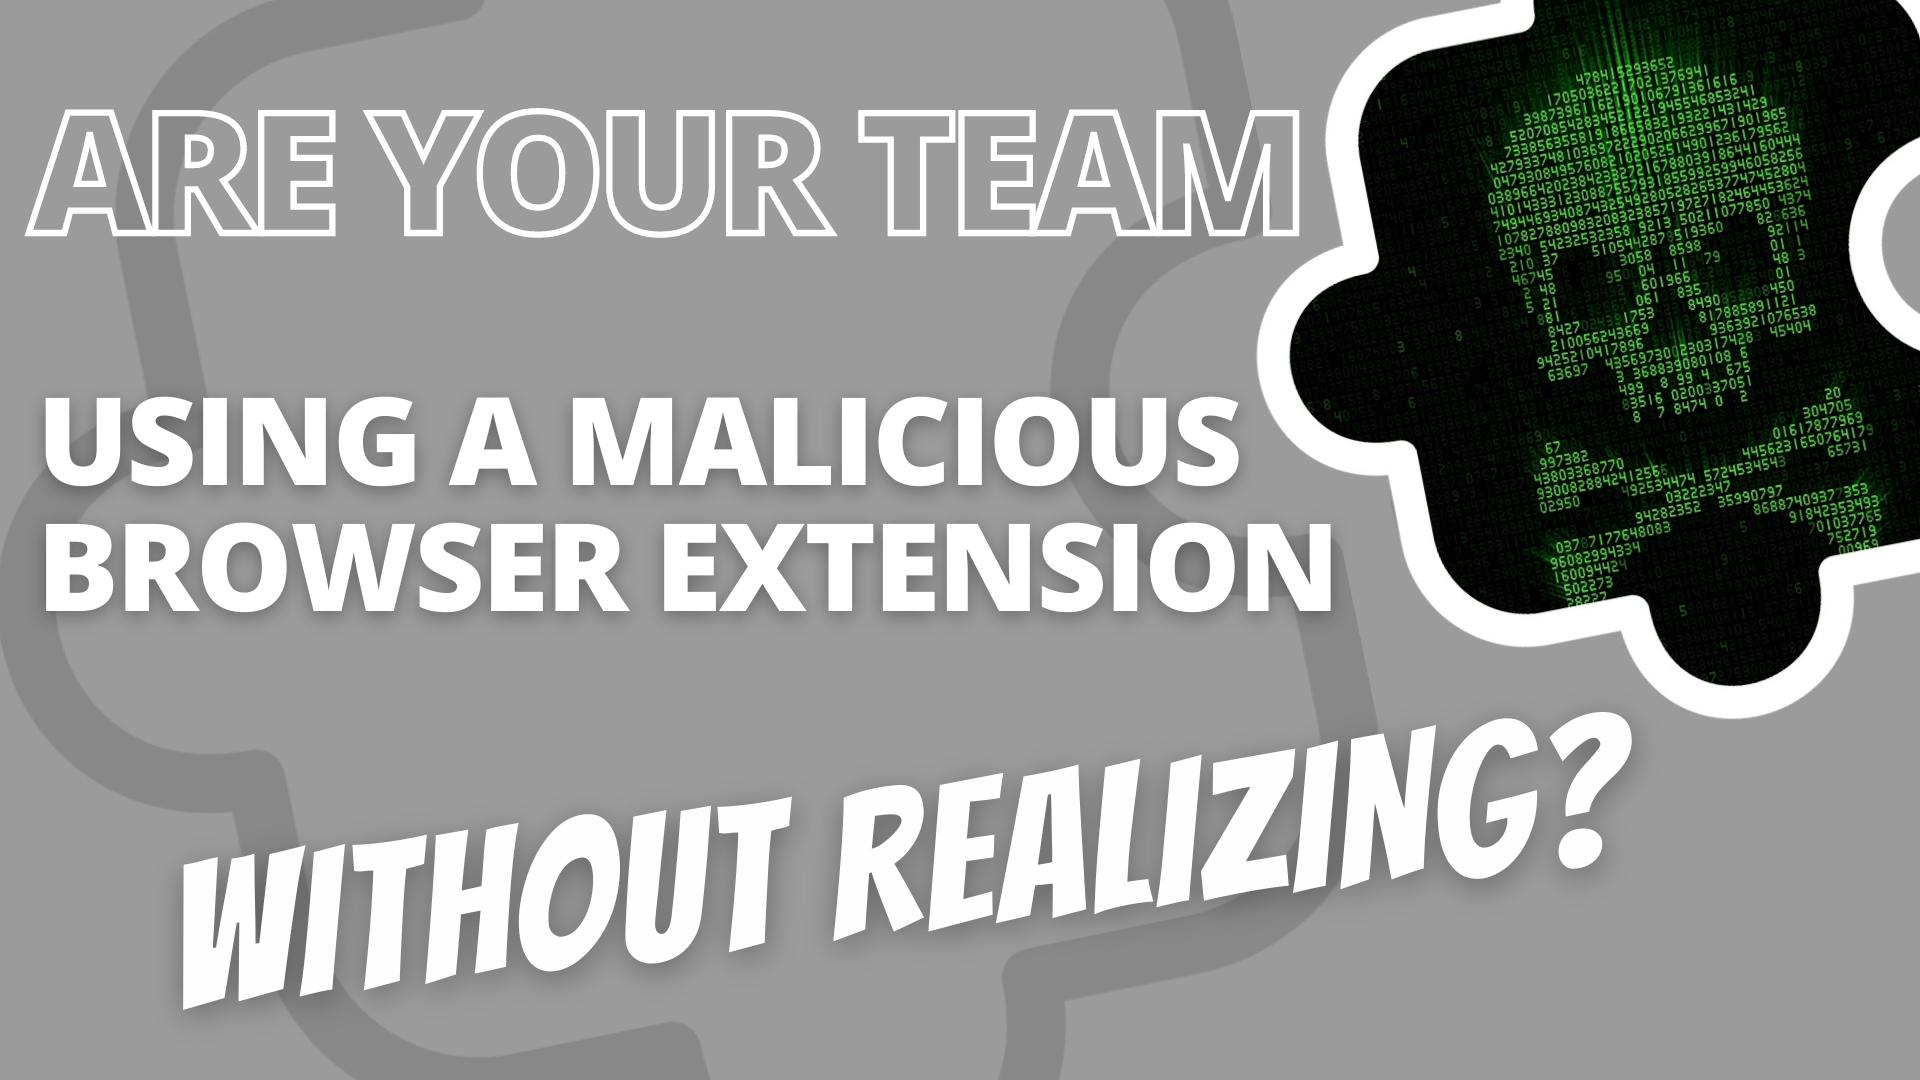 Are you using a malicious browser extension without realizing?